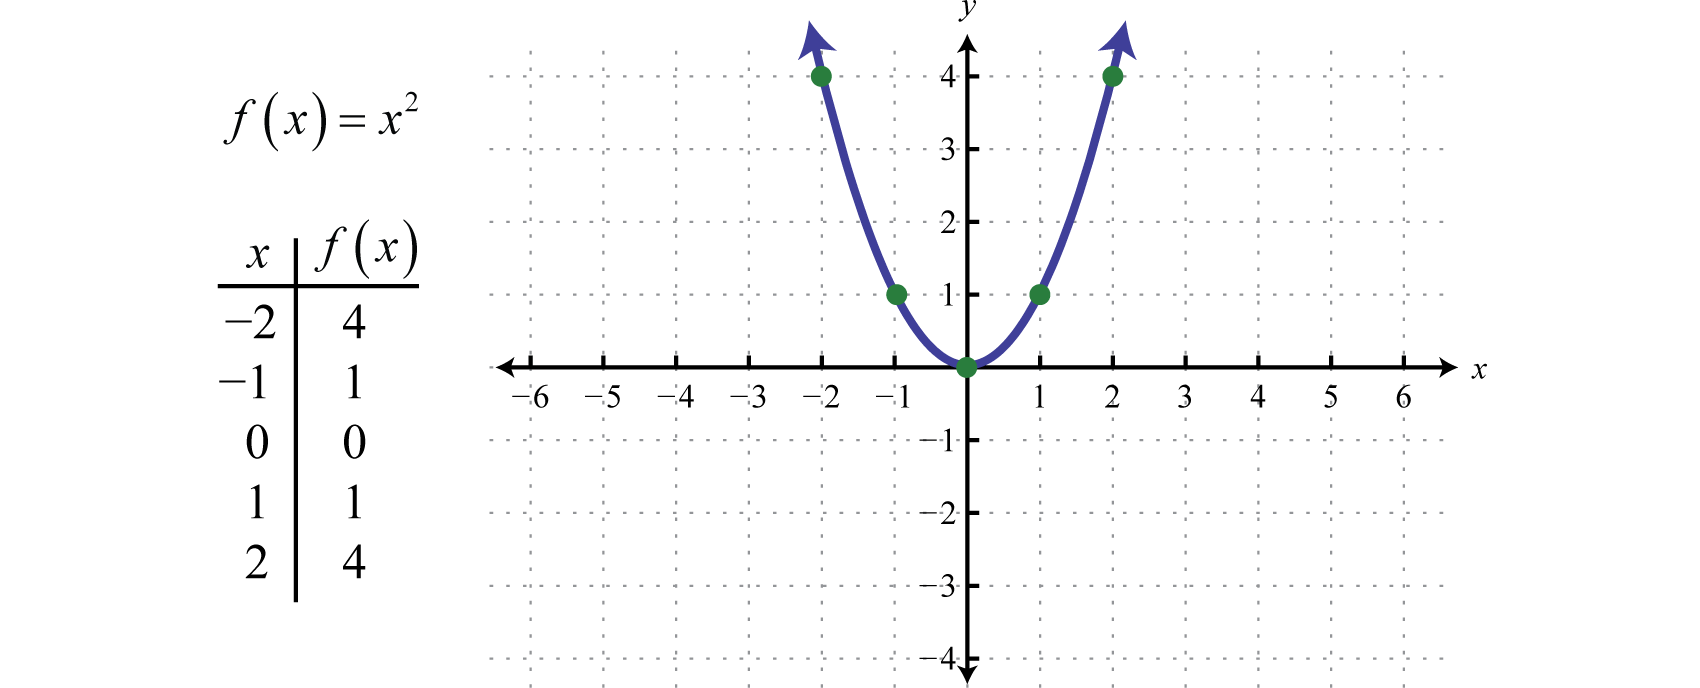 Quadratic Functions and Their Graphs